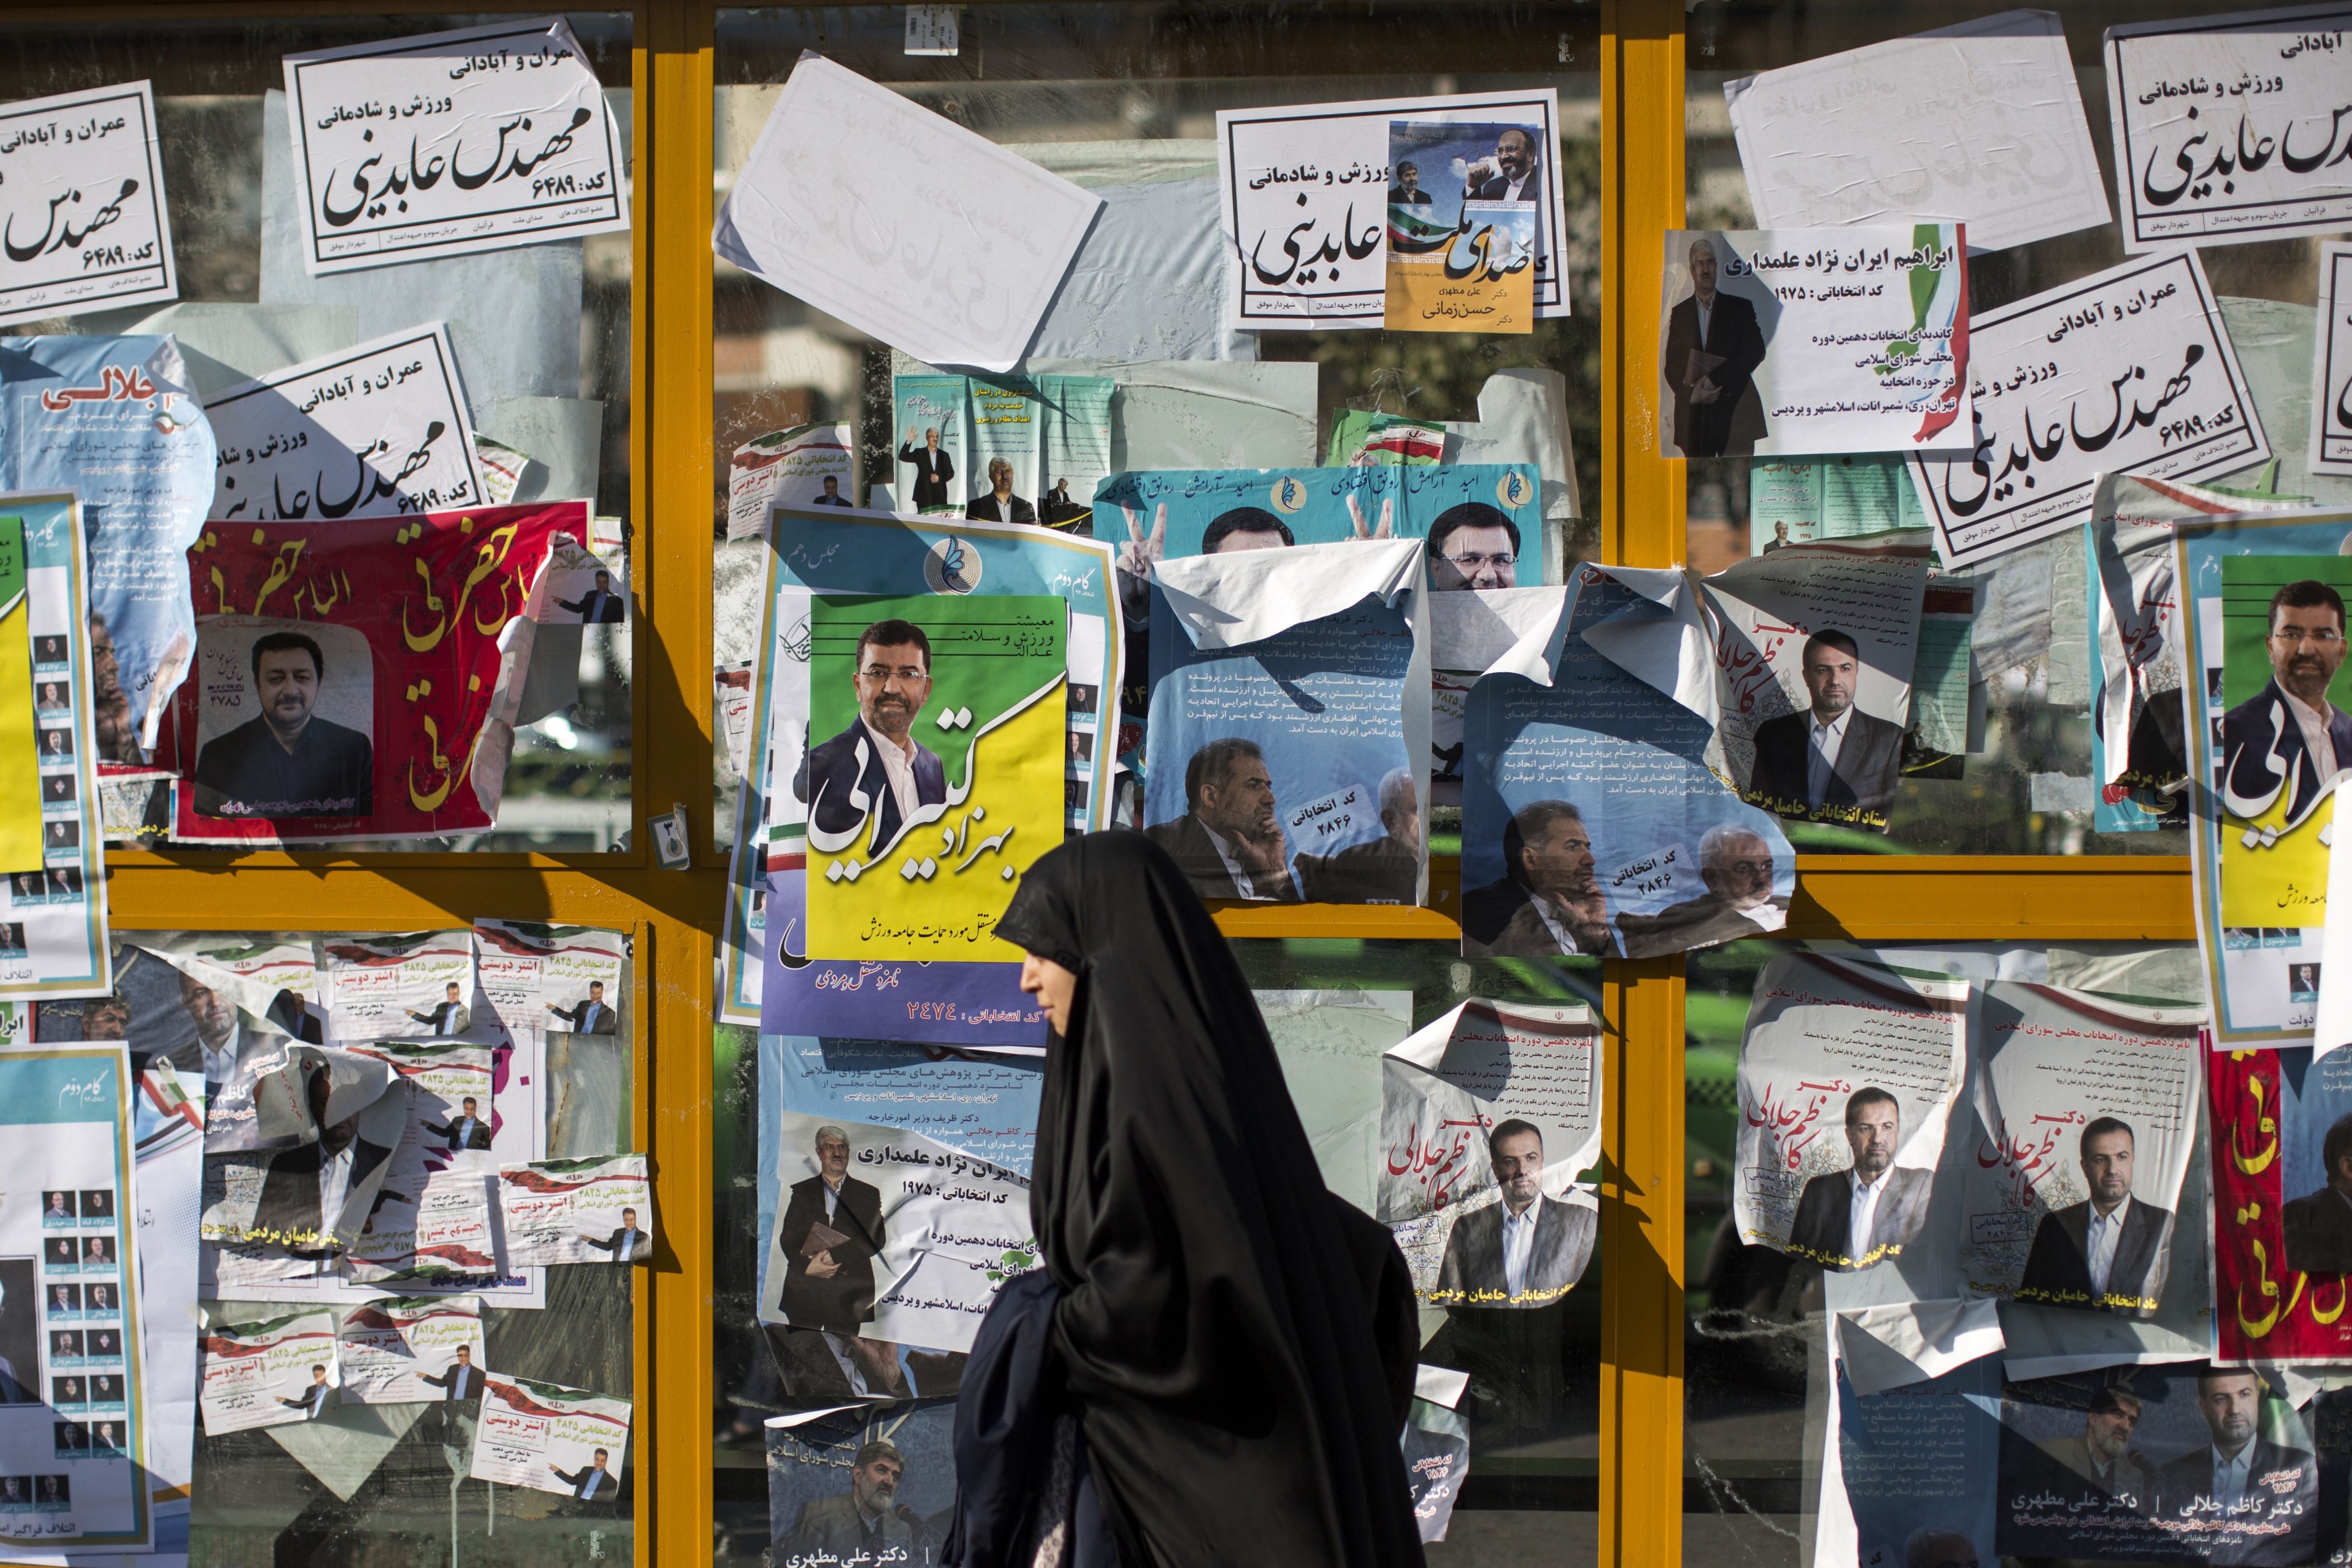 An Iranian woman walks past electoral posters for upcoming parliamentary elections in downtown Tehran on Feb. 25, 2016. (Behrouz Mehri—AFP/Getty Images)